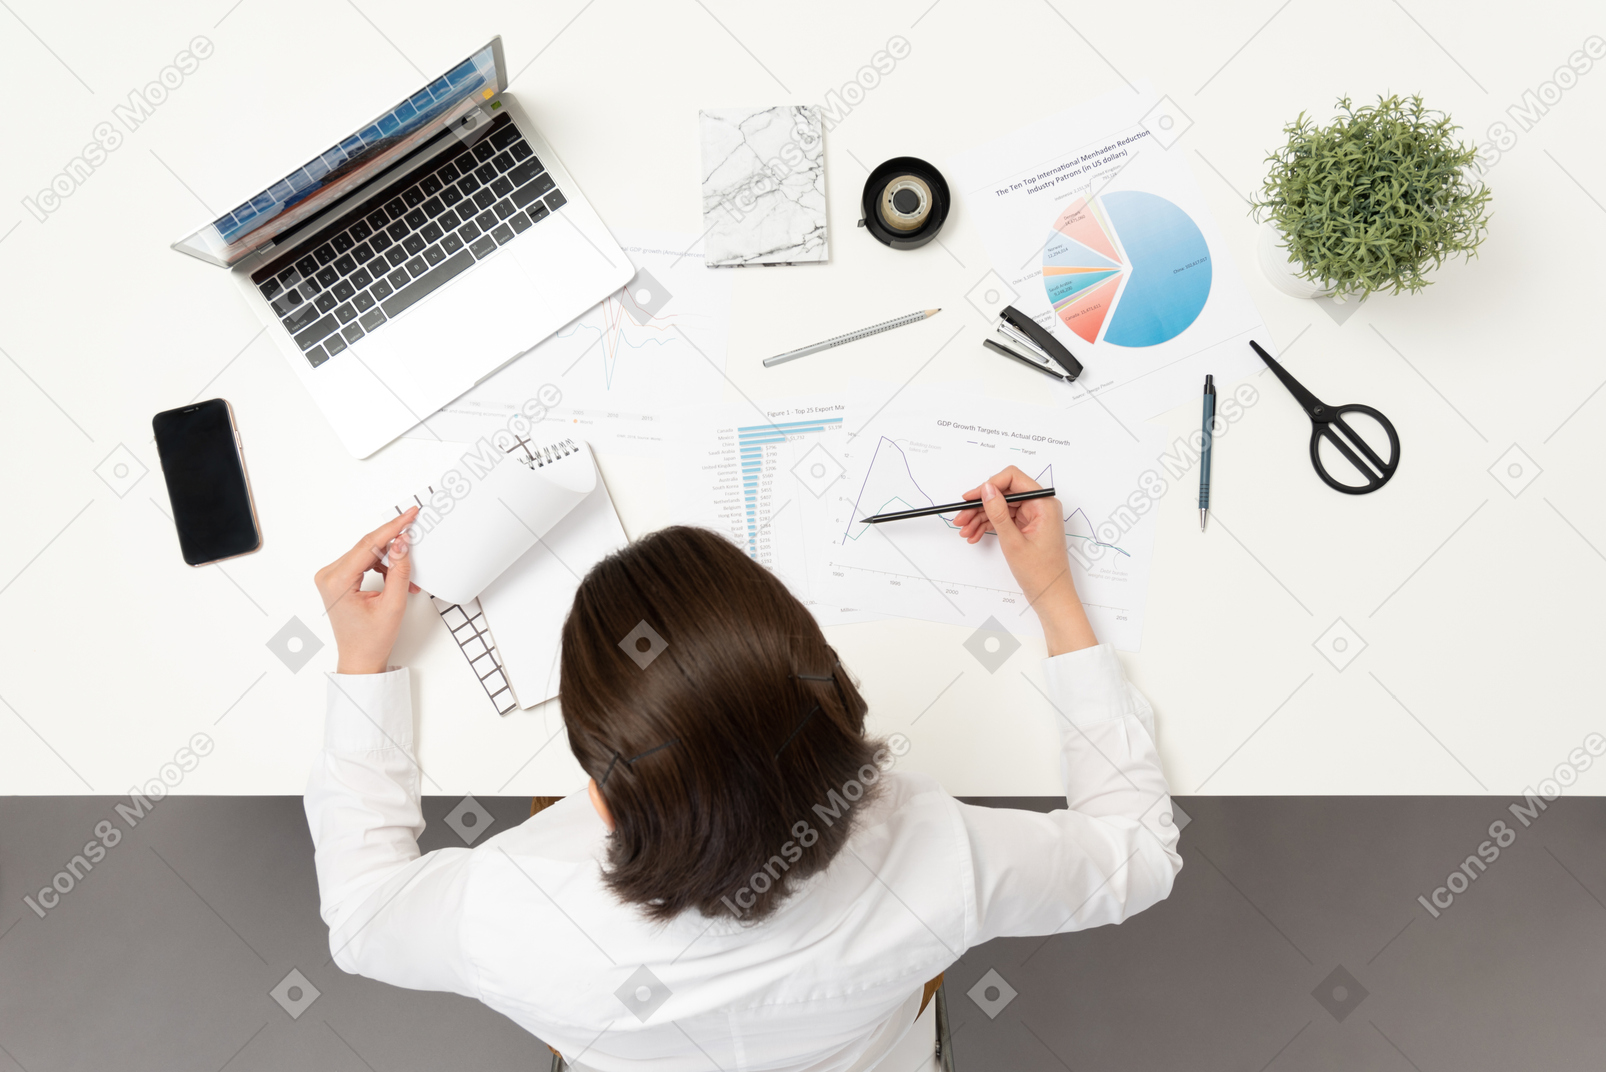 A female office worker looking through notes at the table